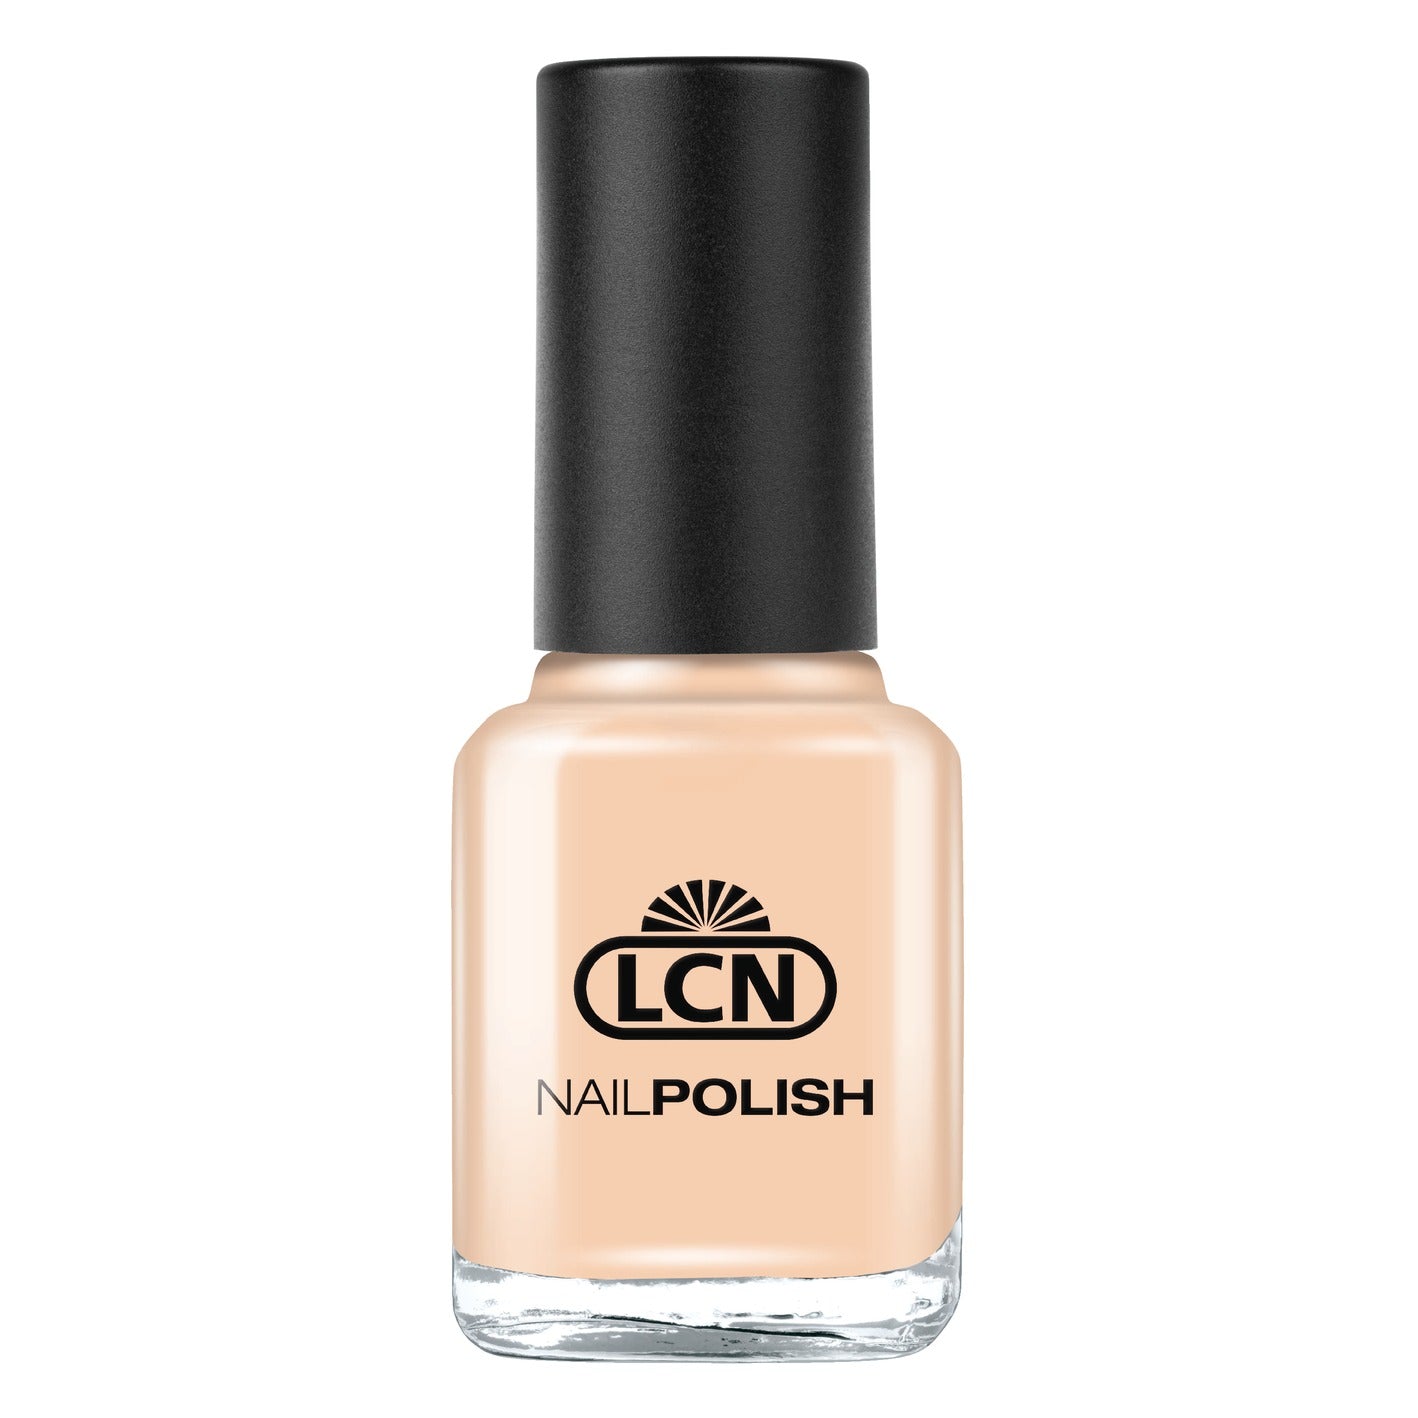 LCN Nail Polish, FD1 french deluxe nearly nude, 8ml